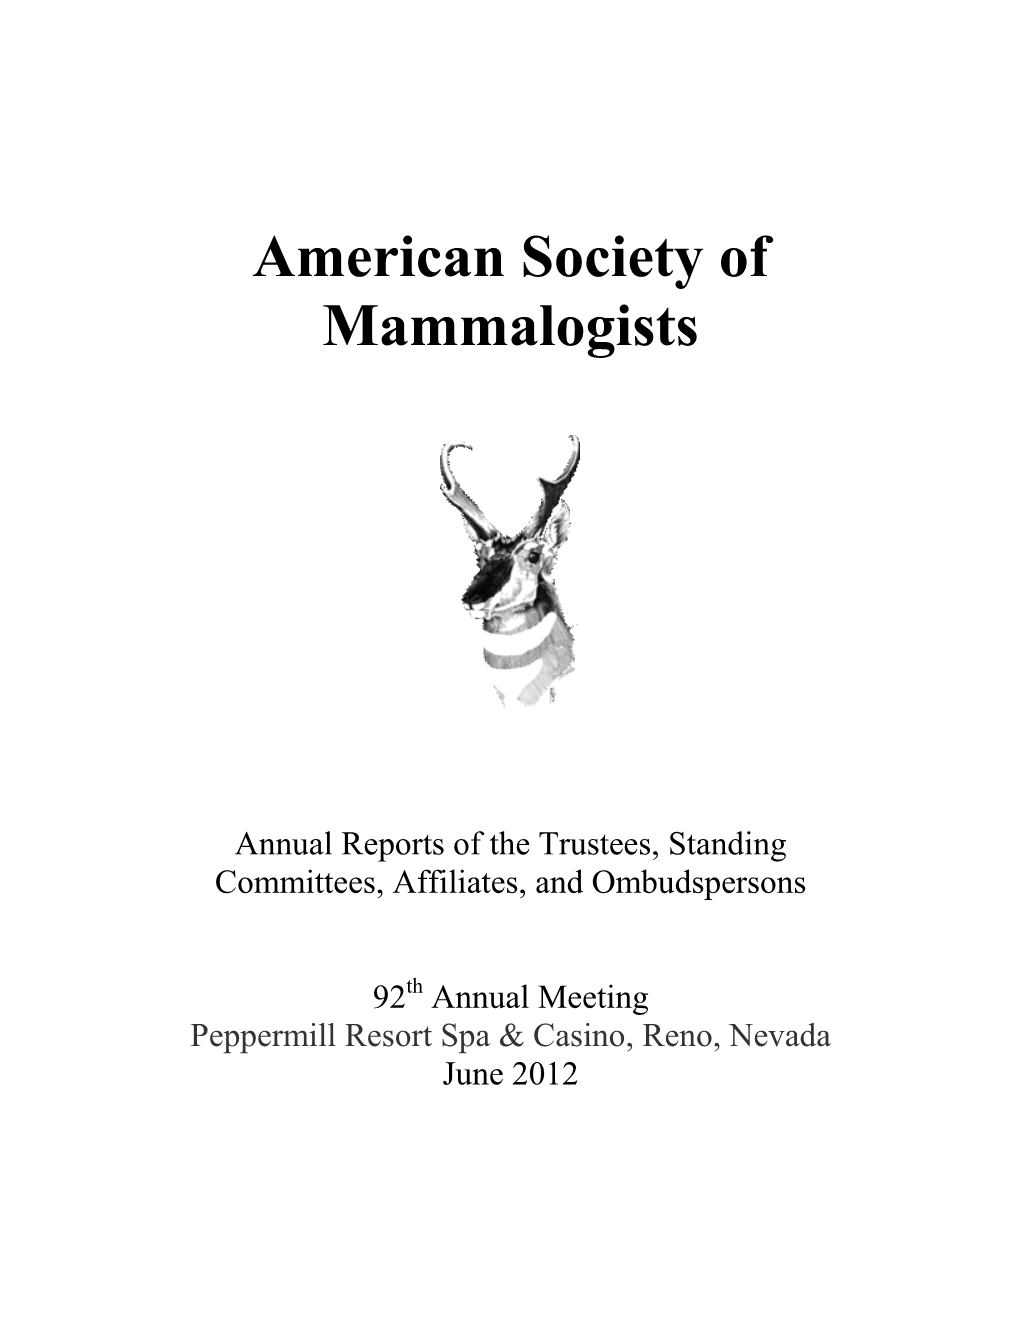 2012 Annual Reports of the Trustees, Standing Committees, Affiliates, and Ombudspersons